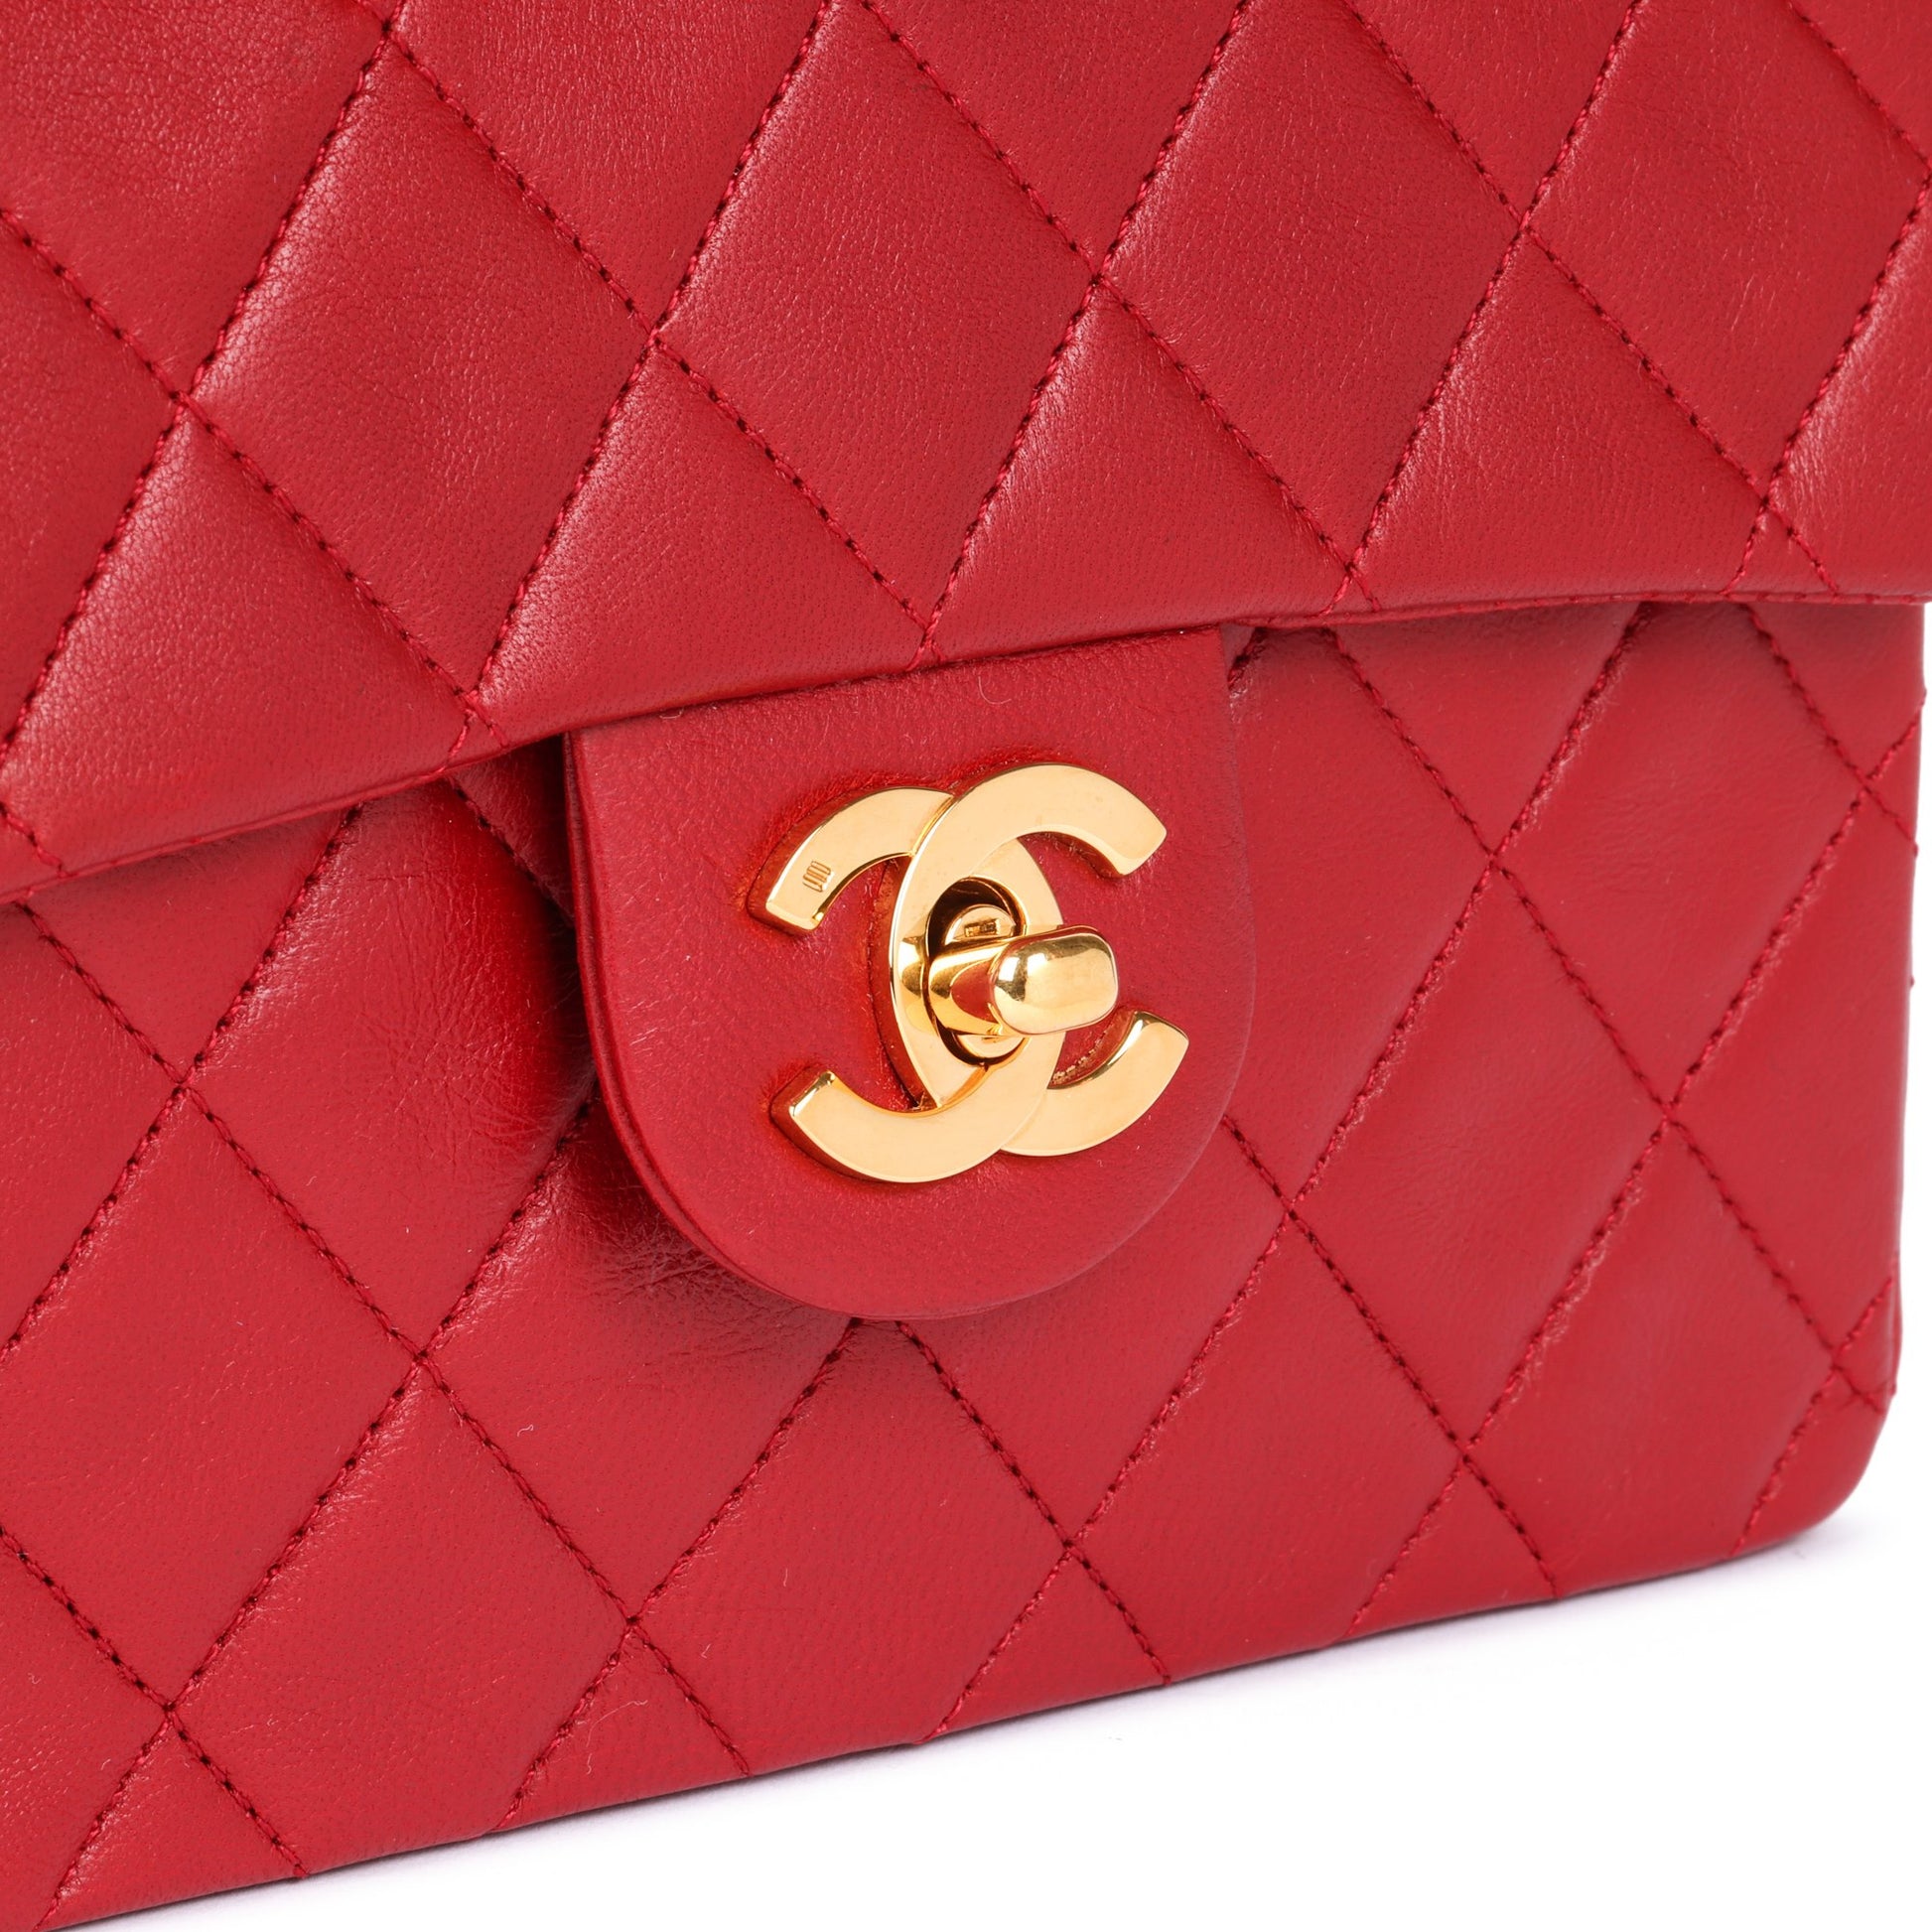 Chanel Vintage Quilted Classic Mini Square Flap Bag